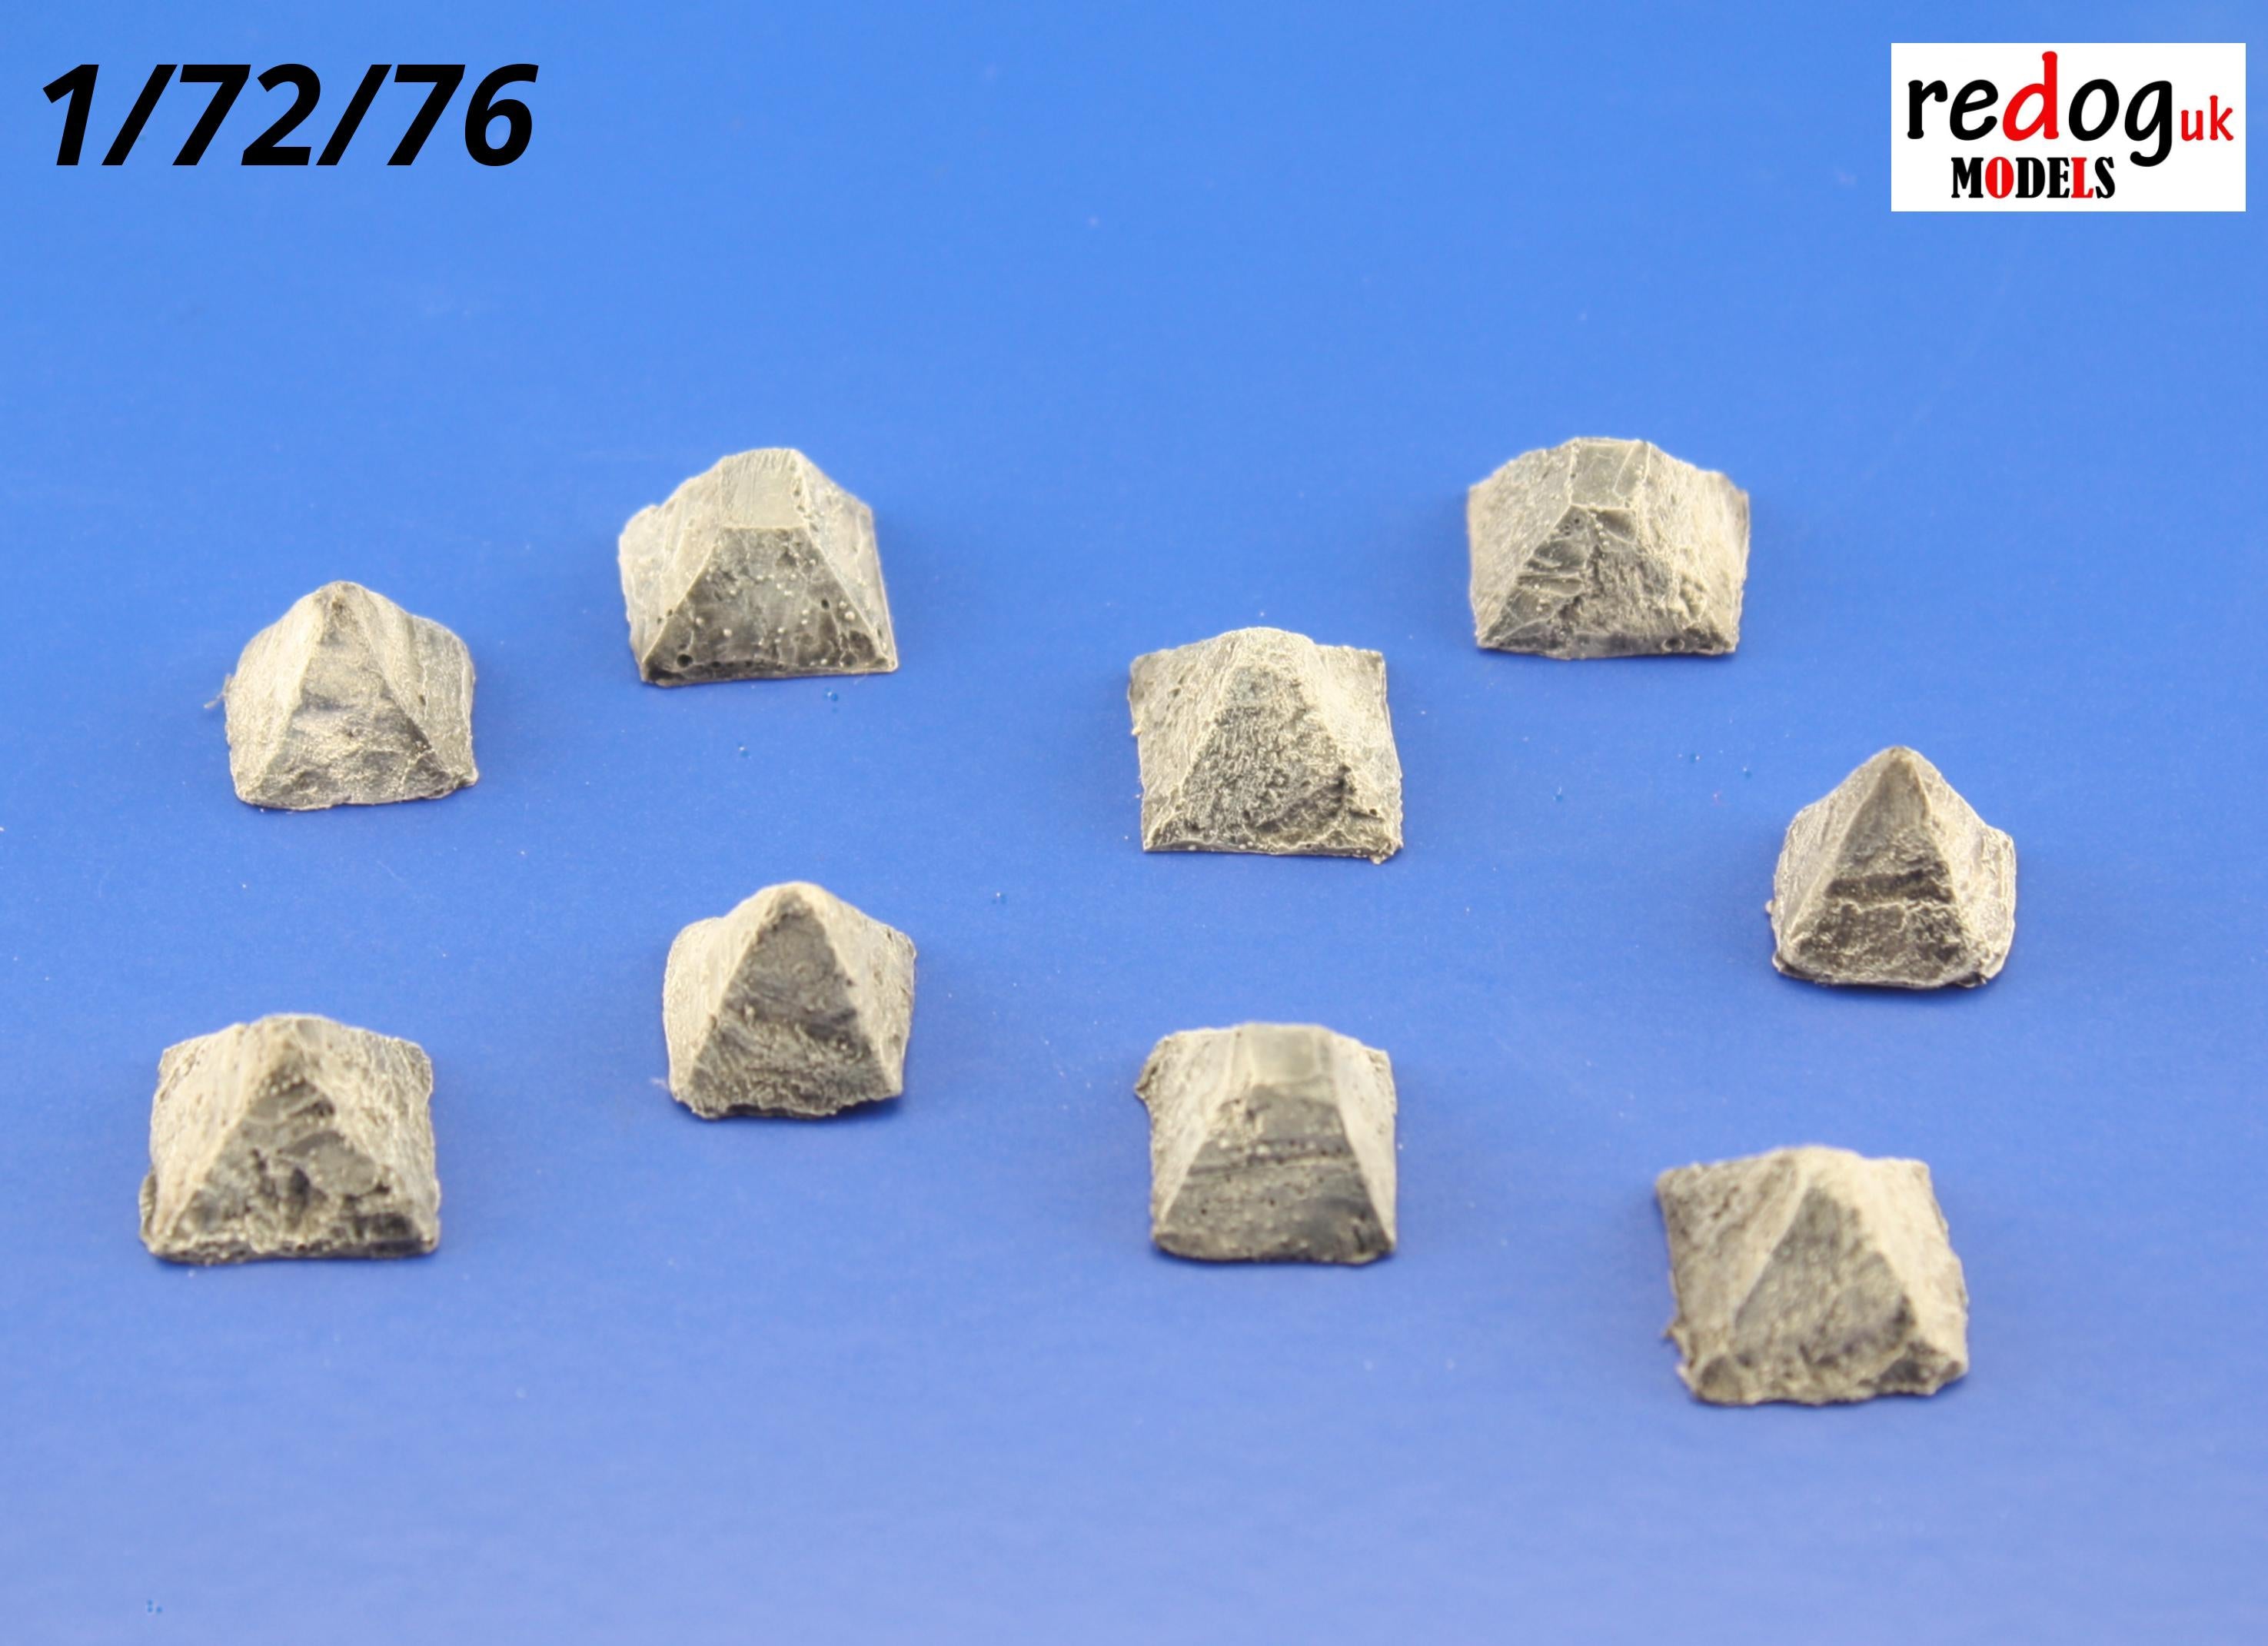 1:72 or 1:76  ANTI-TANK OBSTACLES resin diorama modelling accessories kit - redoguk